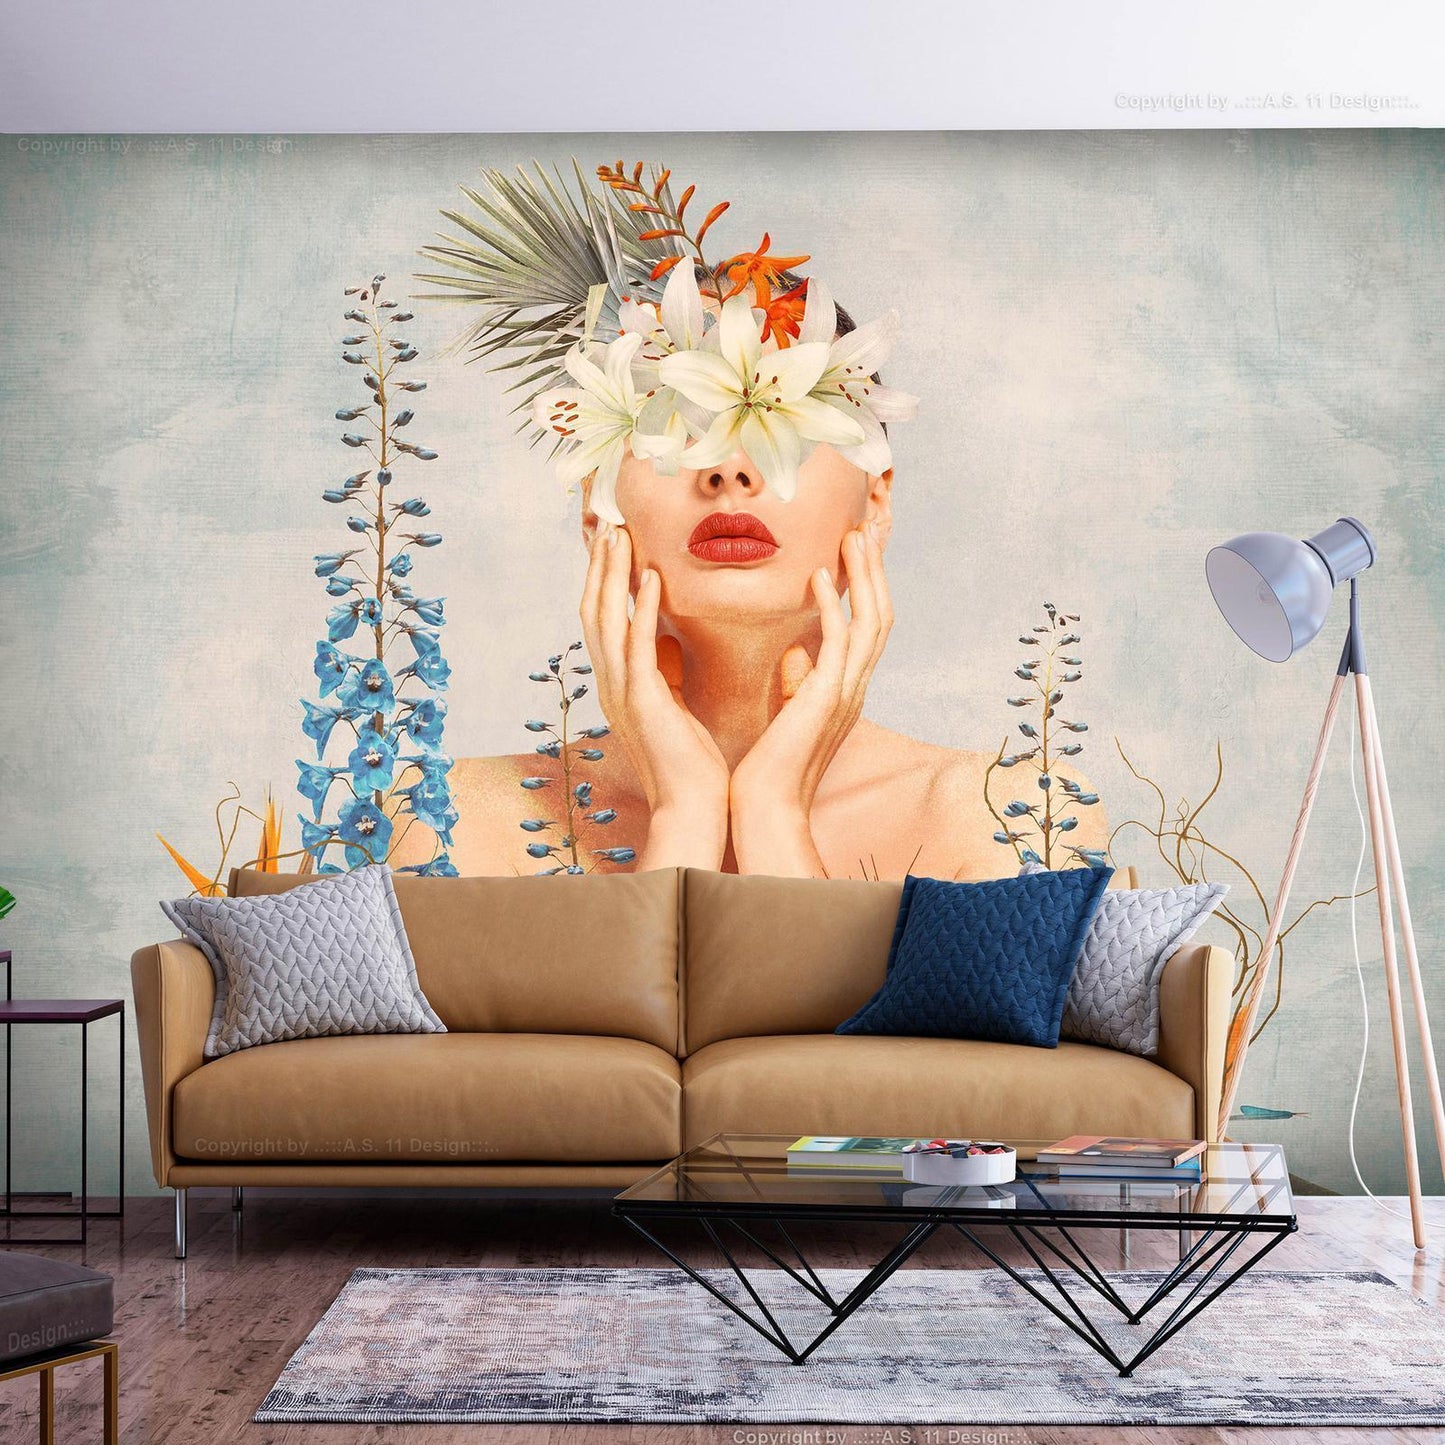 Fotobehang - Nature in thought - female figure among flowers on a patterned background